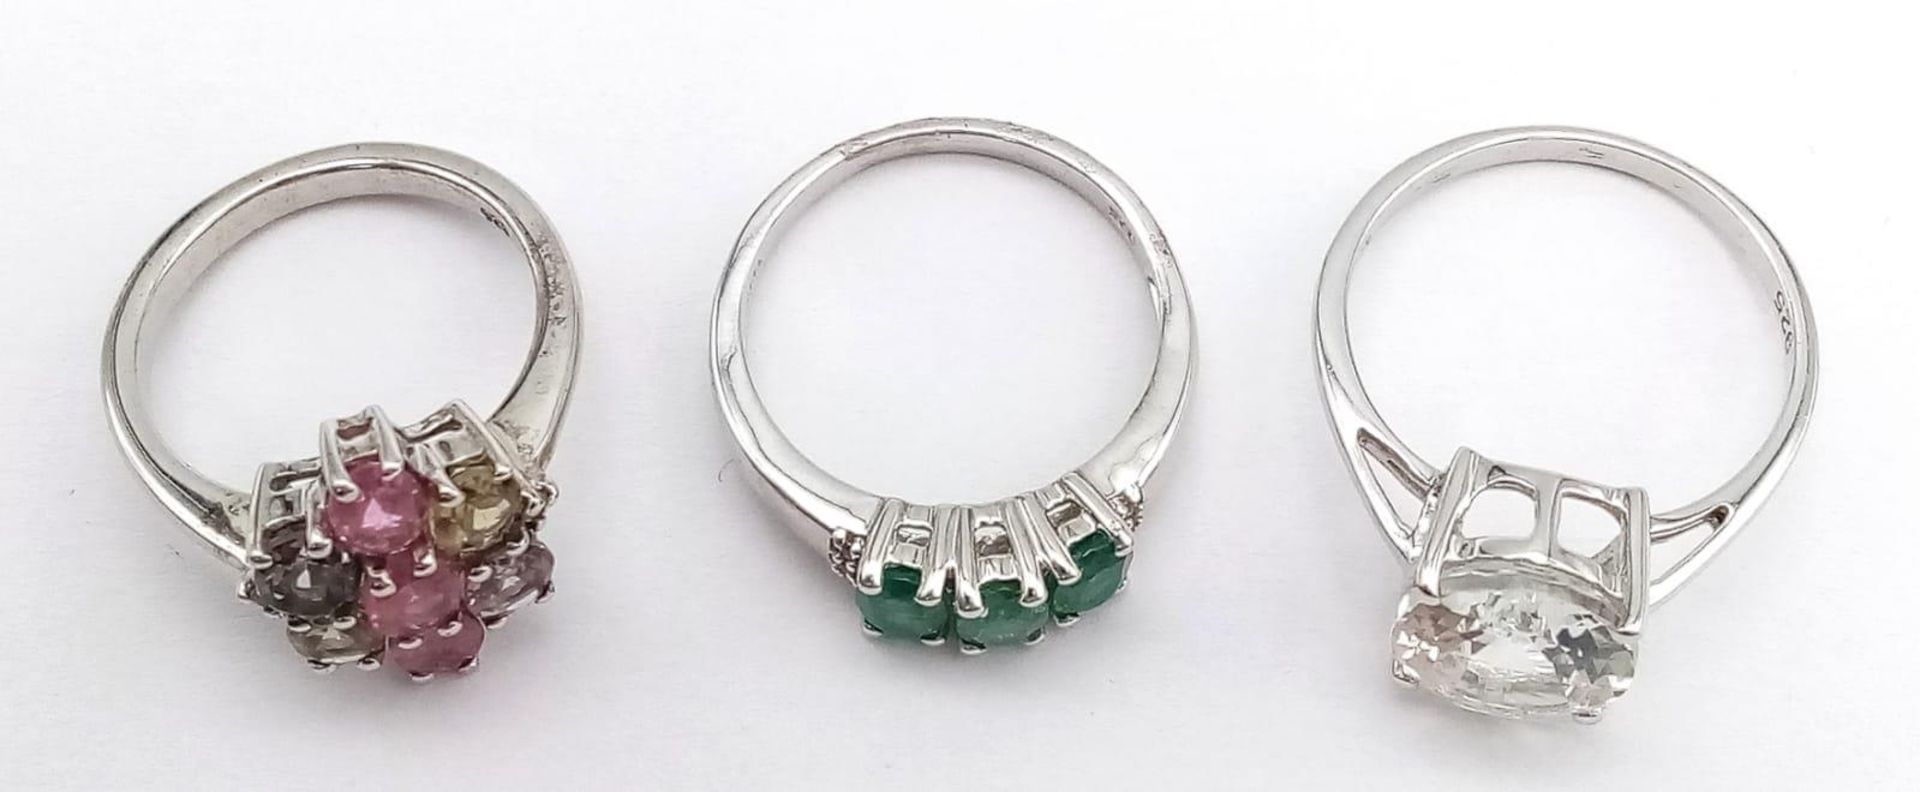 Three 925 Sterling Silver Gemstone Rings: Tourmaline - Size N, Topaz - Size S and Emerald - Size P. - Image 3 of 4